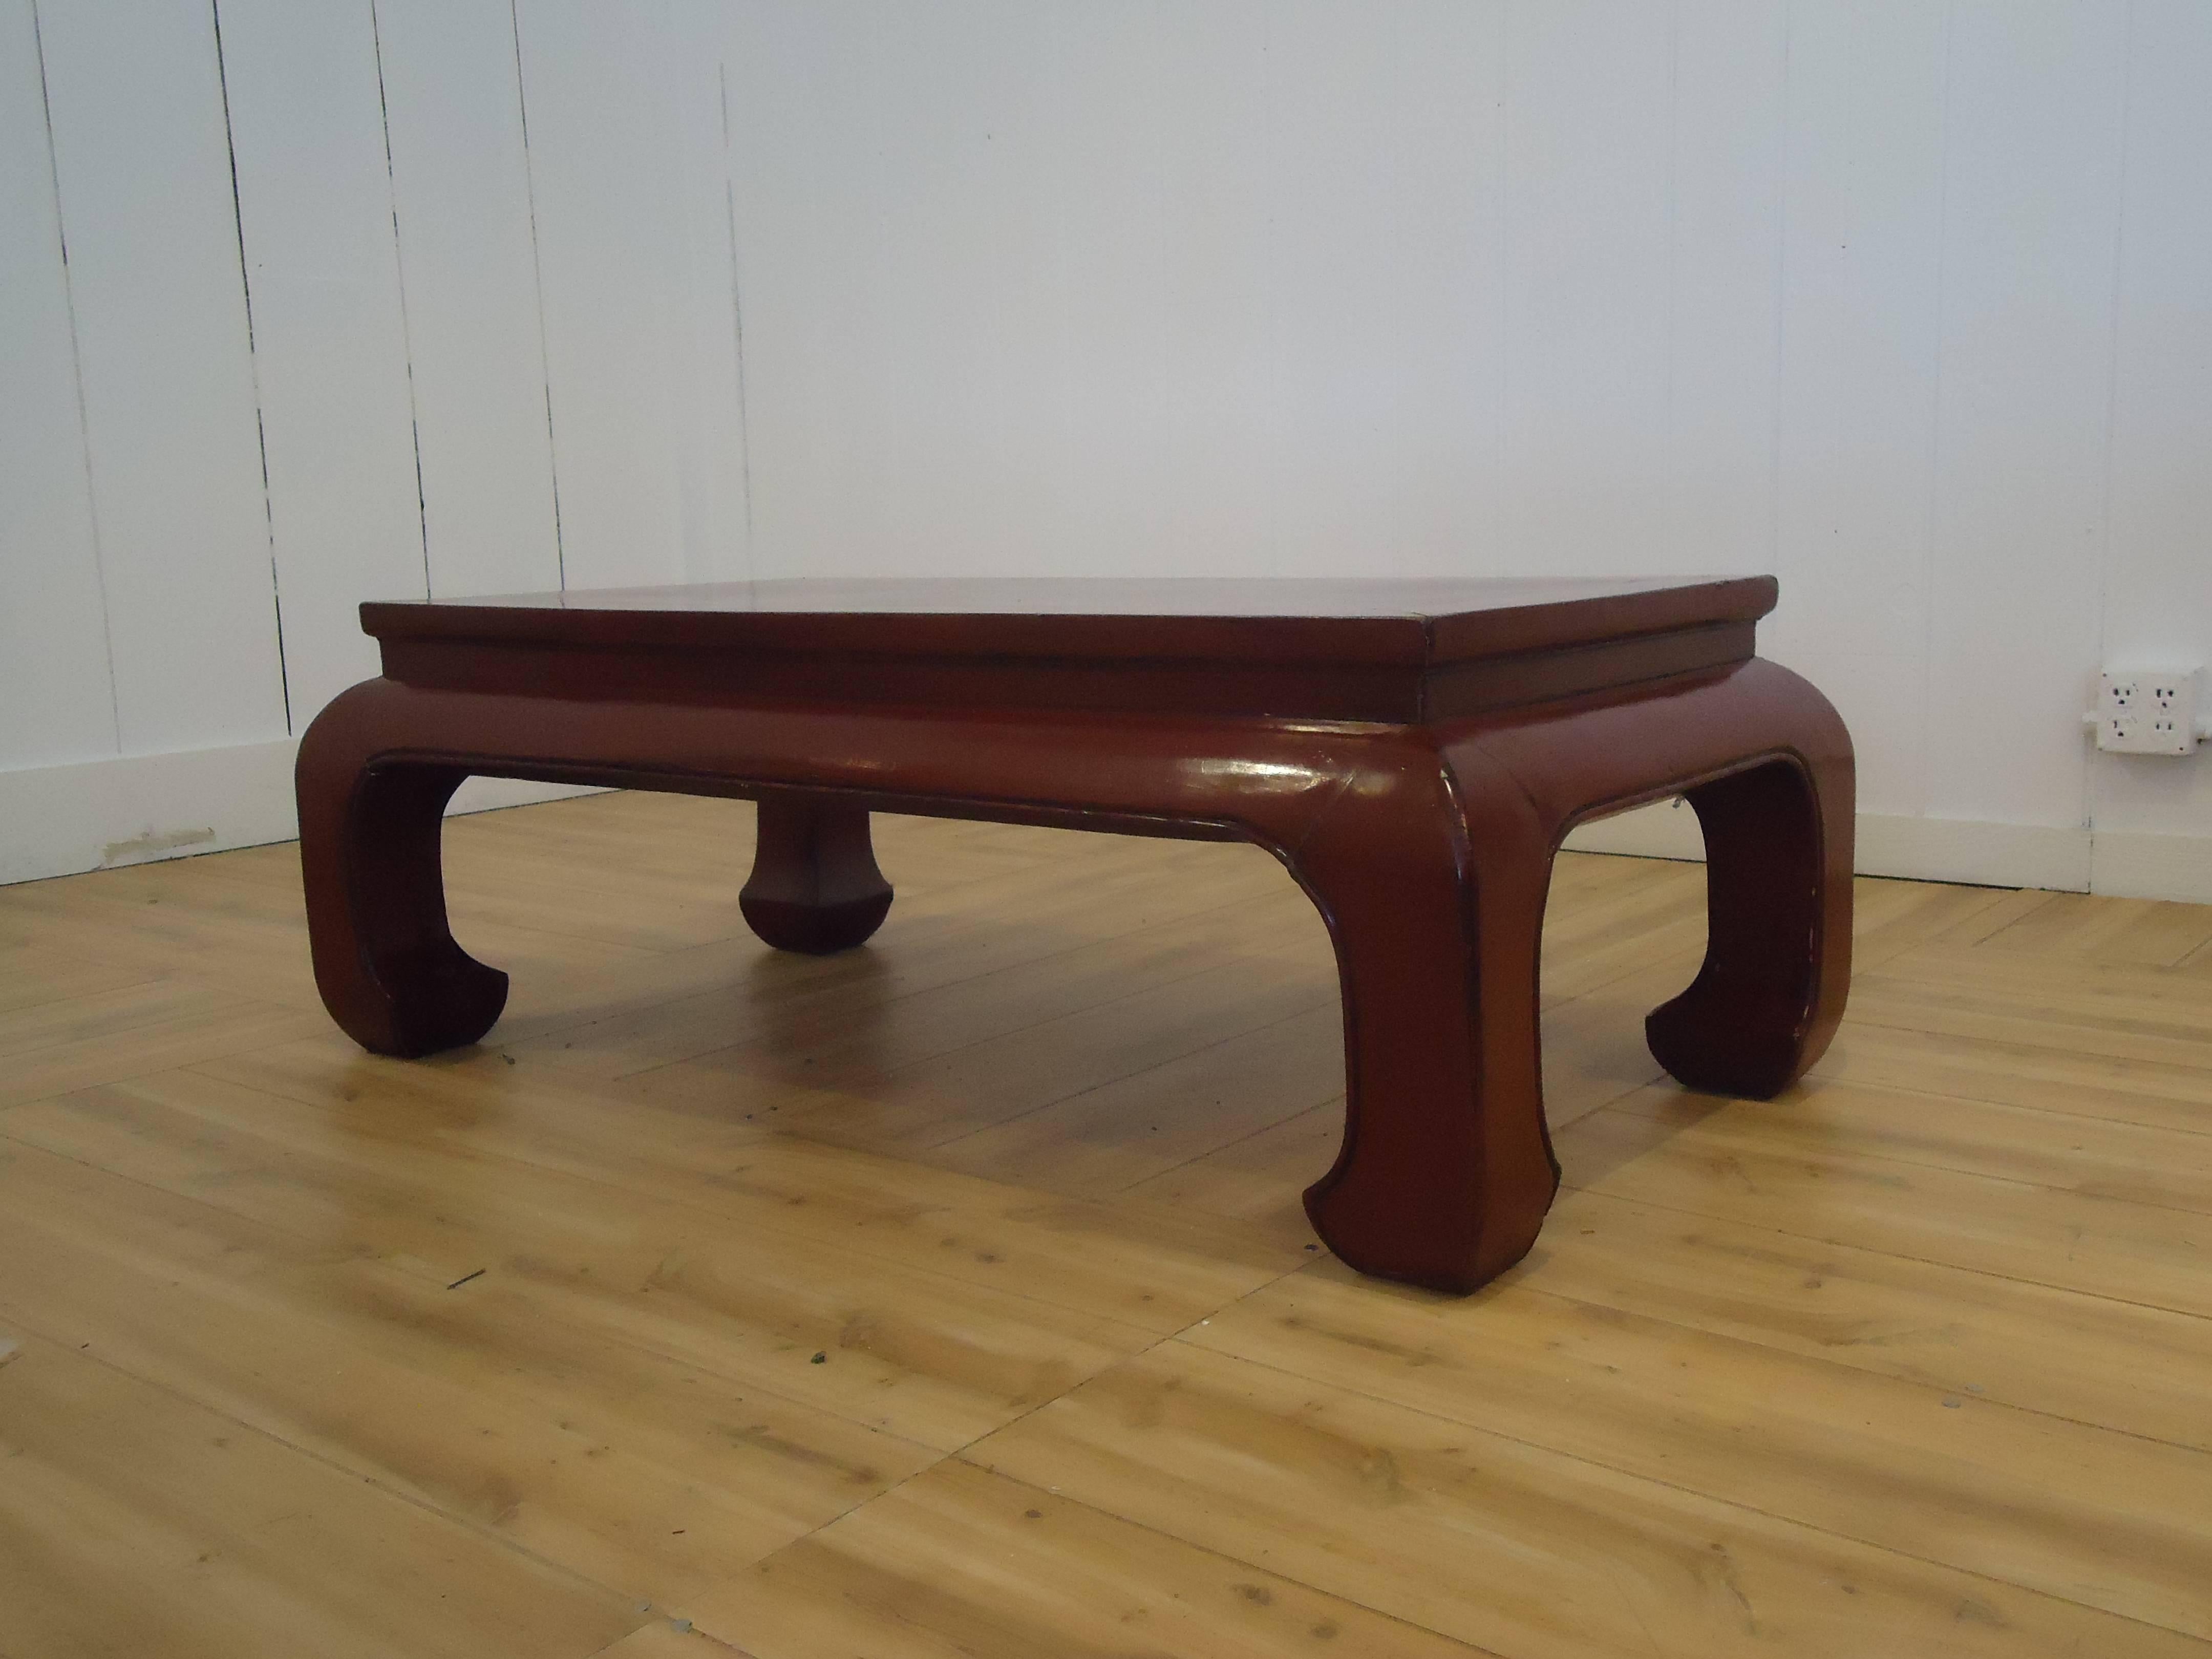 Solidly constructed antique wooden coffee table painted a rich dark reddish maroon, with handsome curved legs.